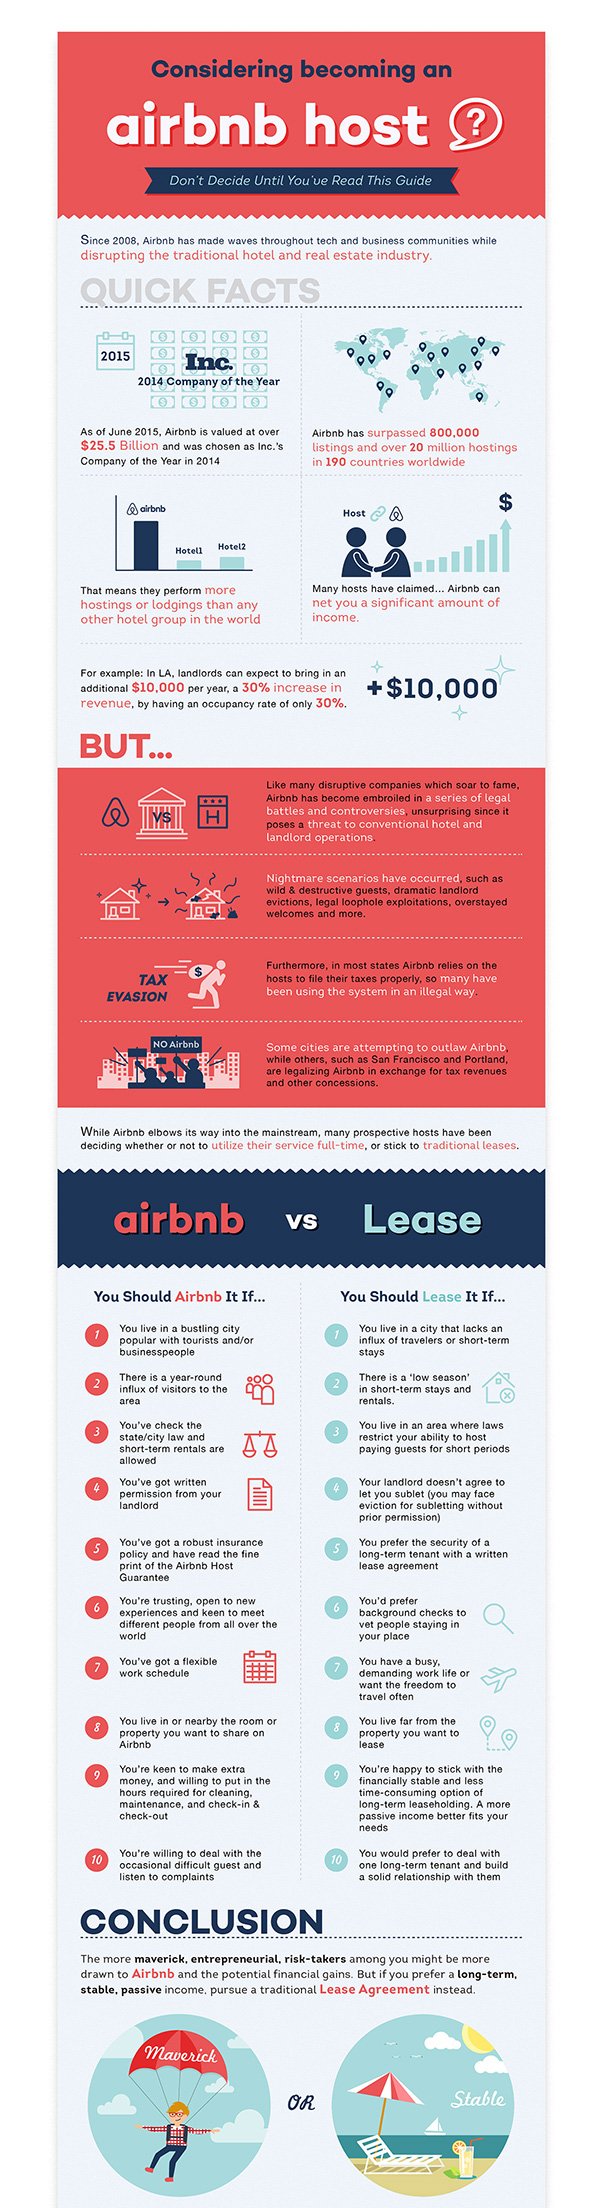 Airbnb-Infographic